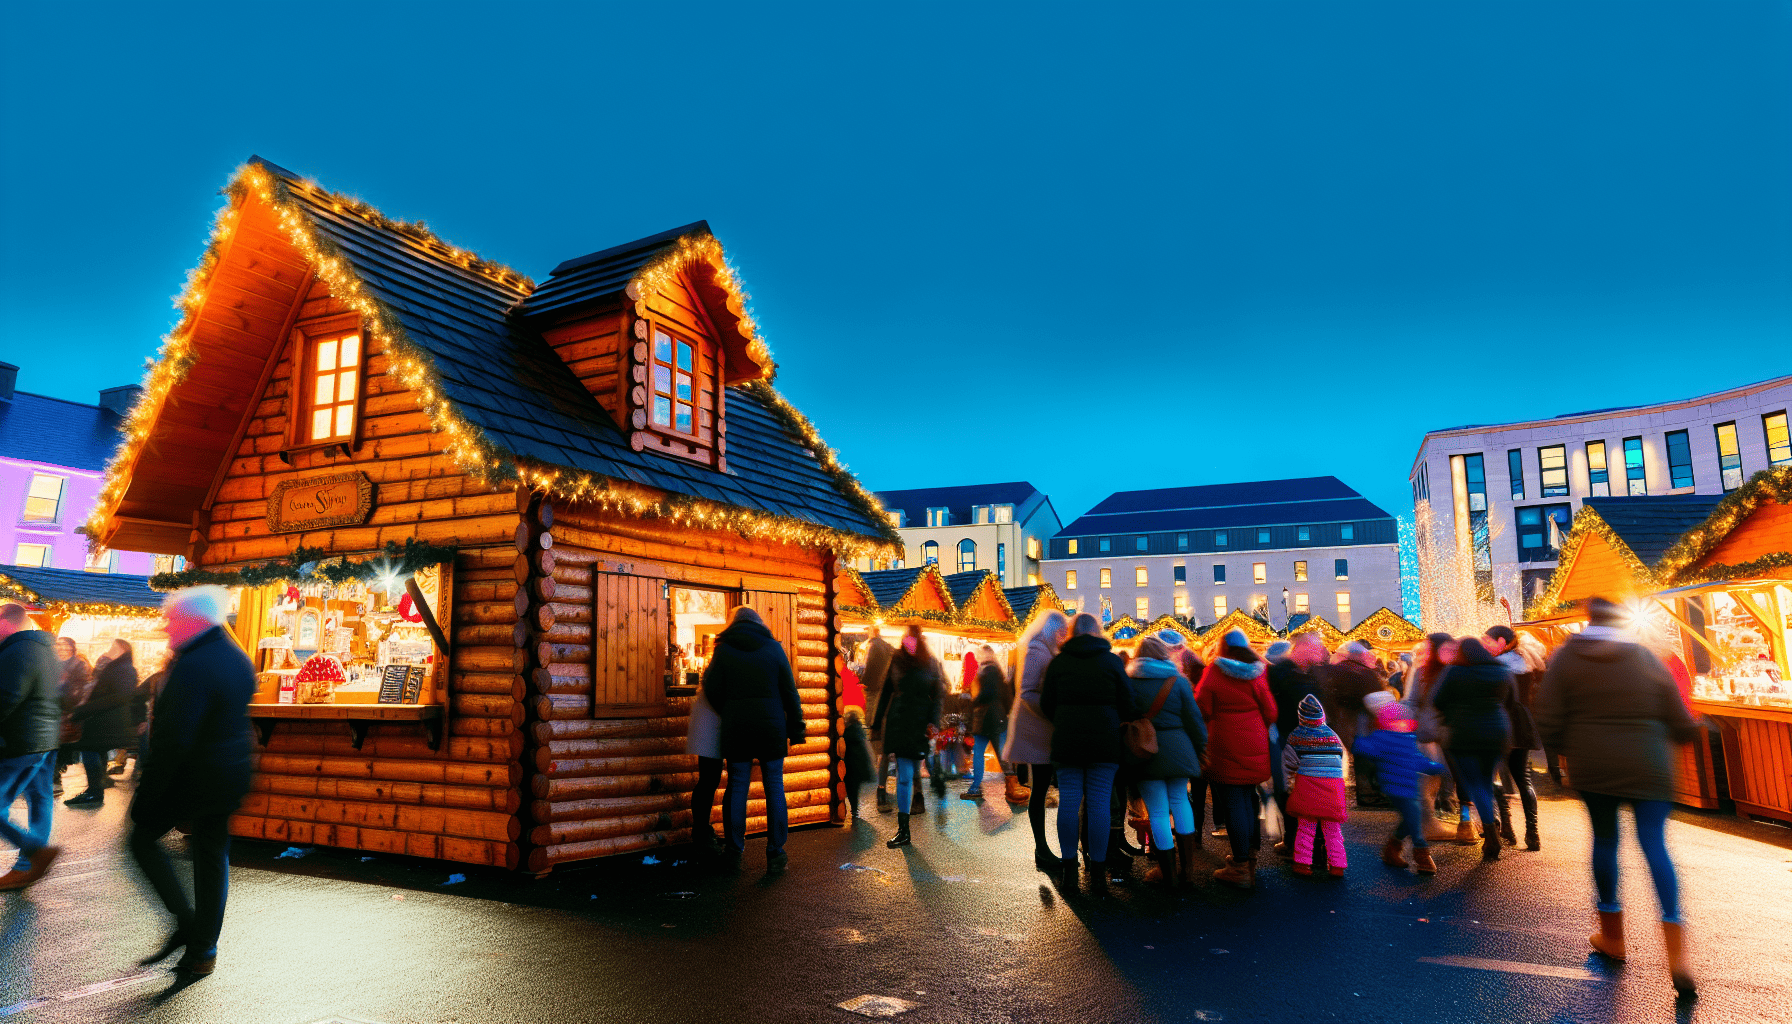 A traditional wooden chalet at Galway Christmas Market